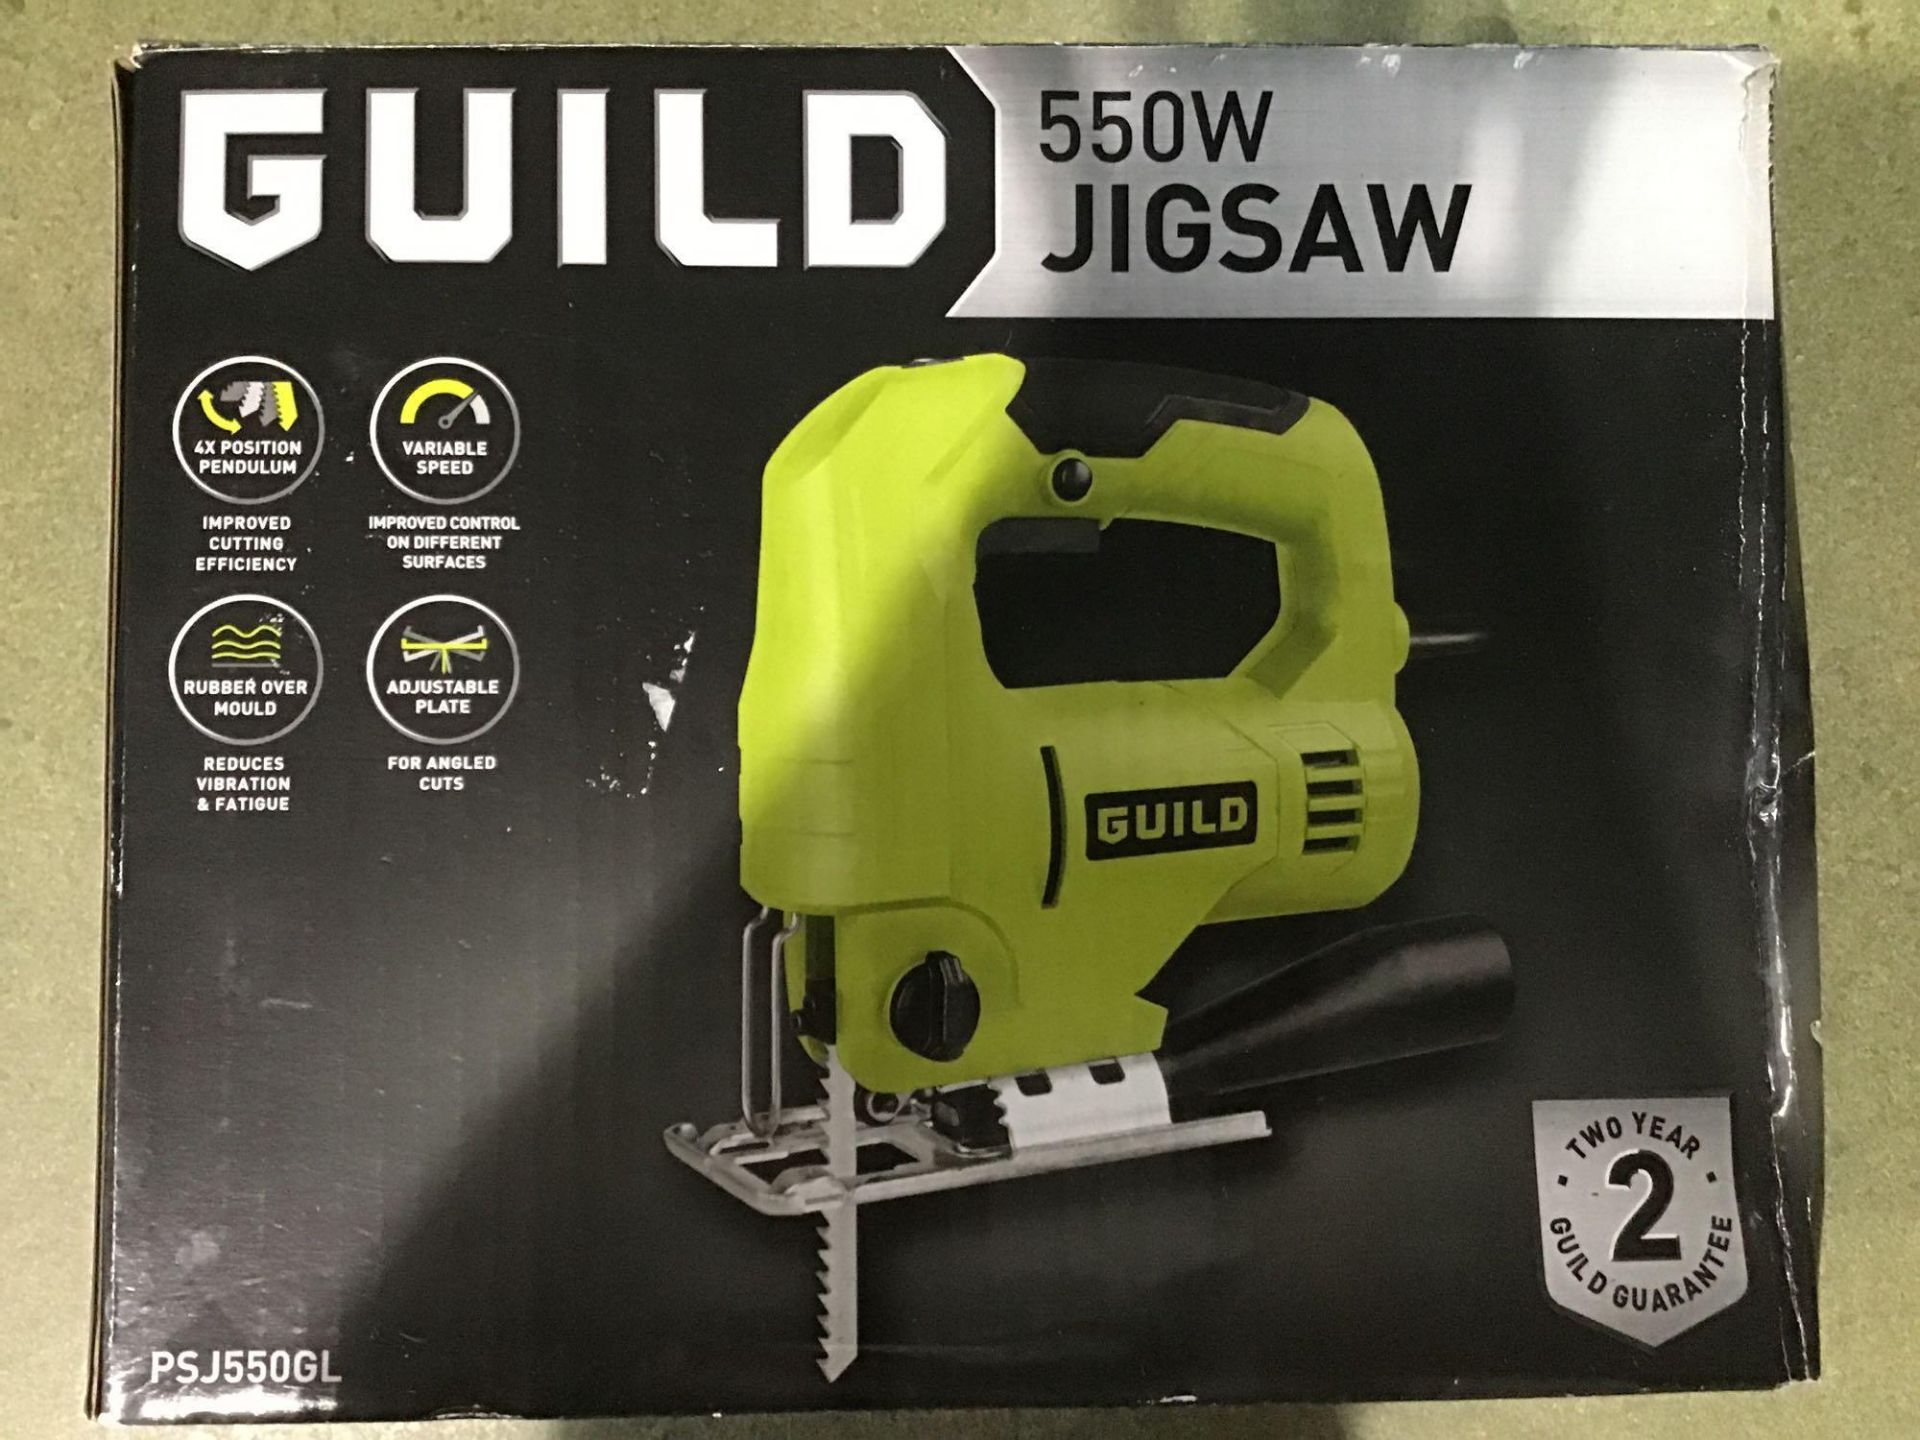 Guild Variable Speed Jigsaw - 550W - £30.00 RRP - Image 2 of 4